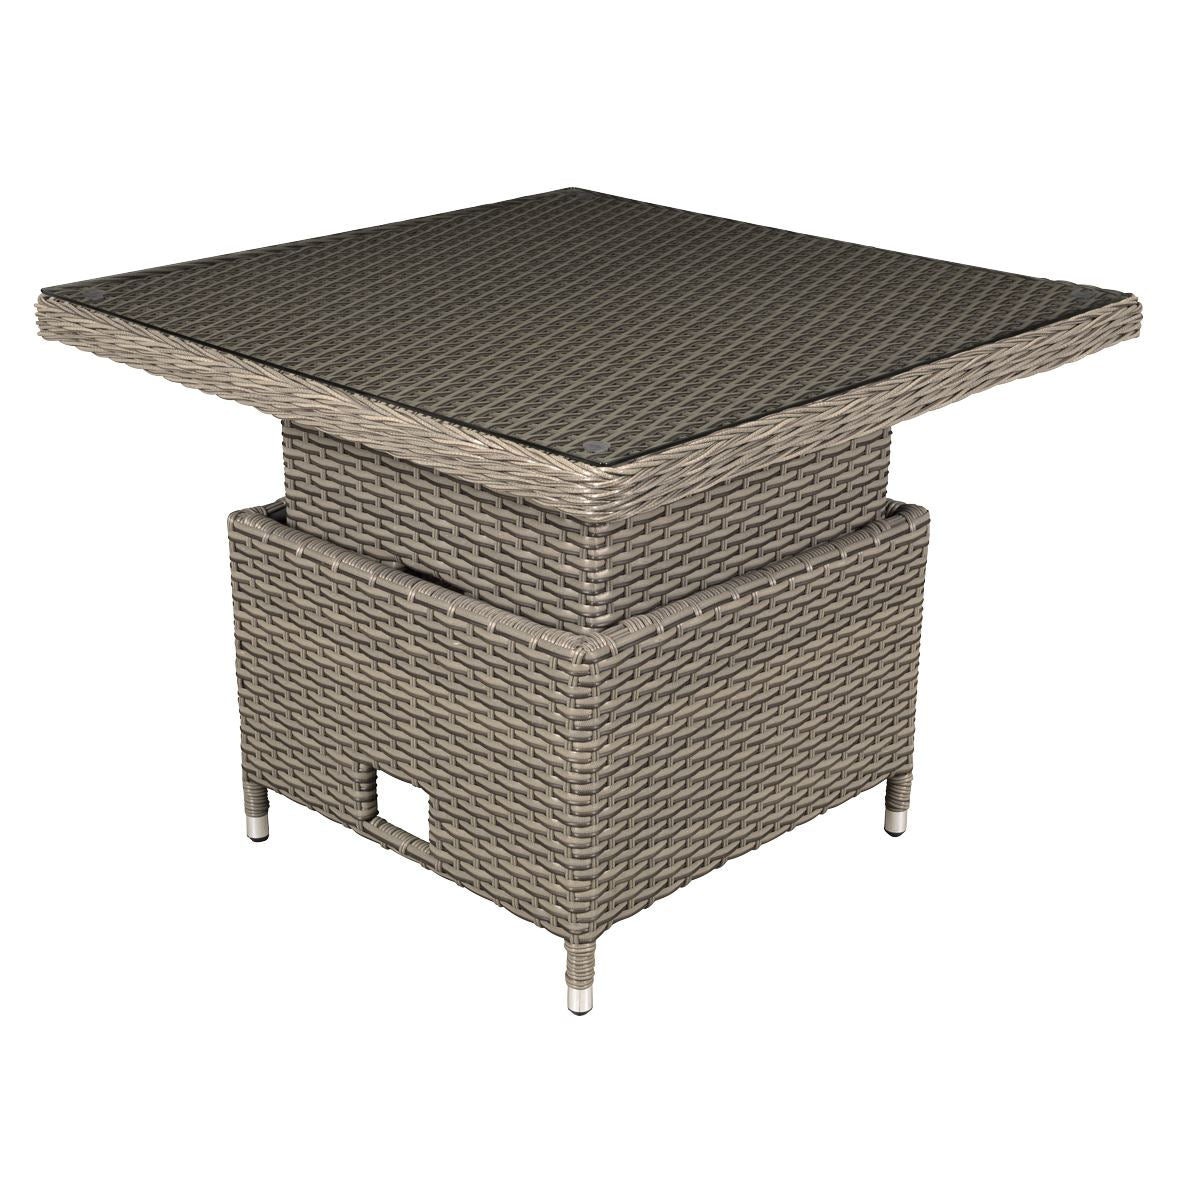 Dellonda Chester Rattan Wicker Adjustable Outdoor Dining Table, Brown